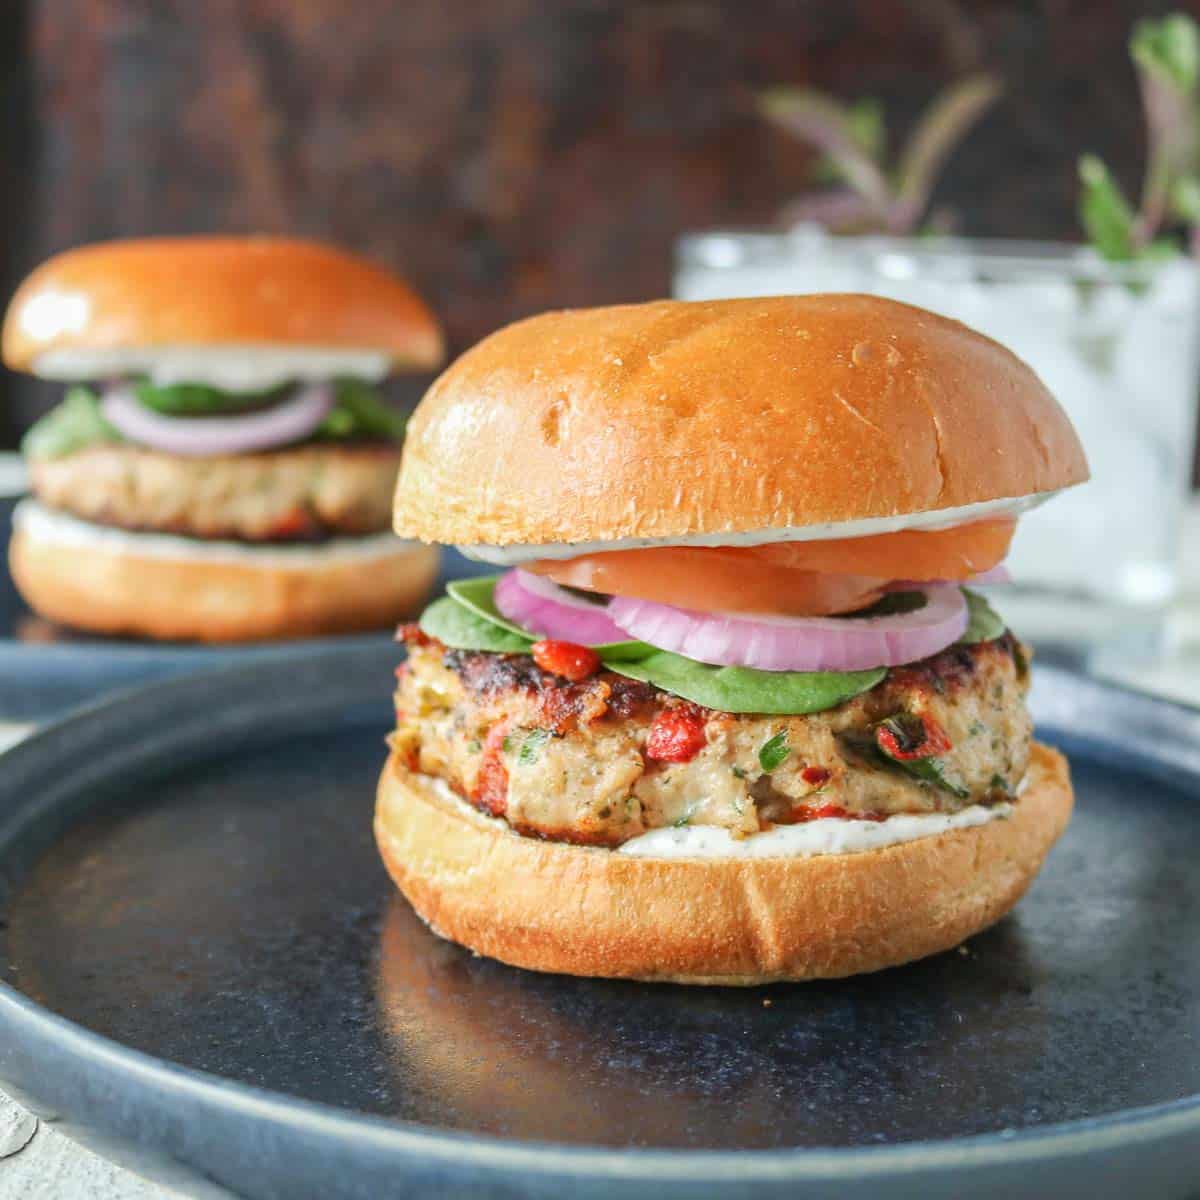 Two Mediterranean ground chicken burgers on plates with glasses of water.